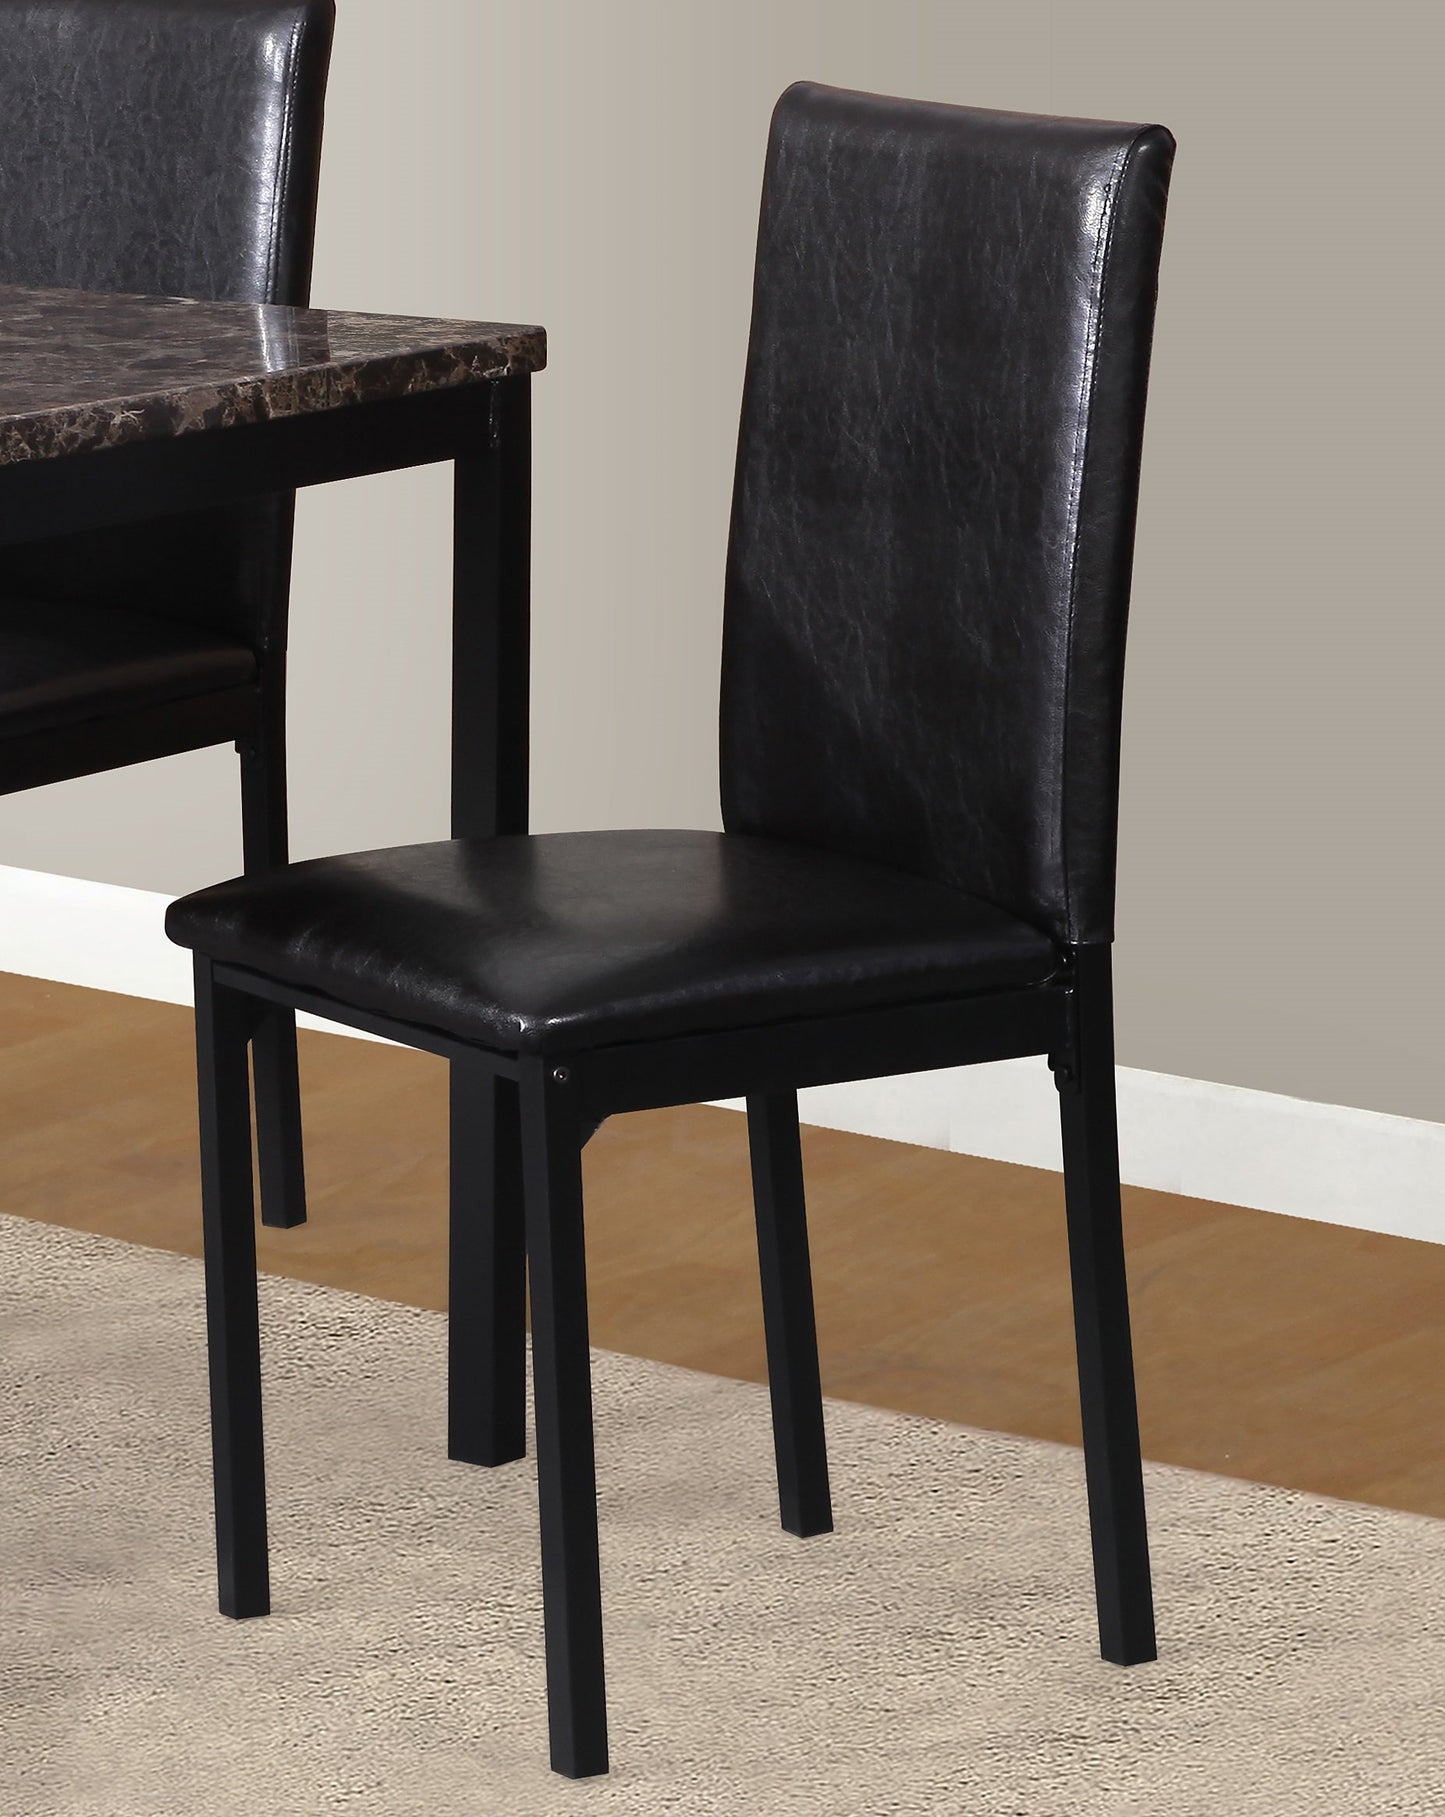 Noyes Faux Leather Seat Metal Frame Black Dining Chairs, Set of 4